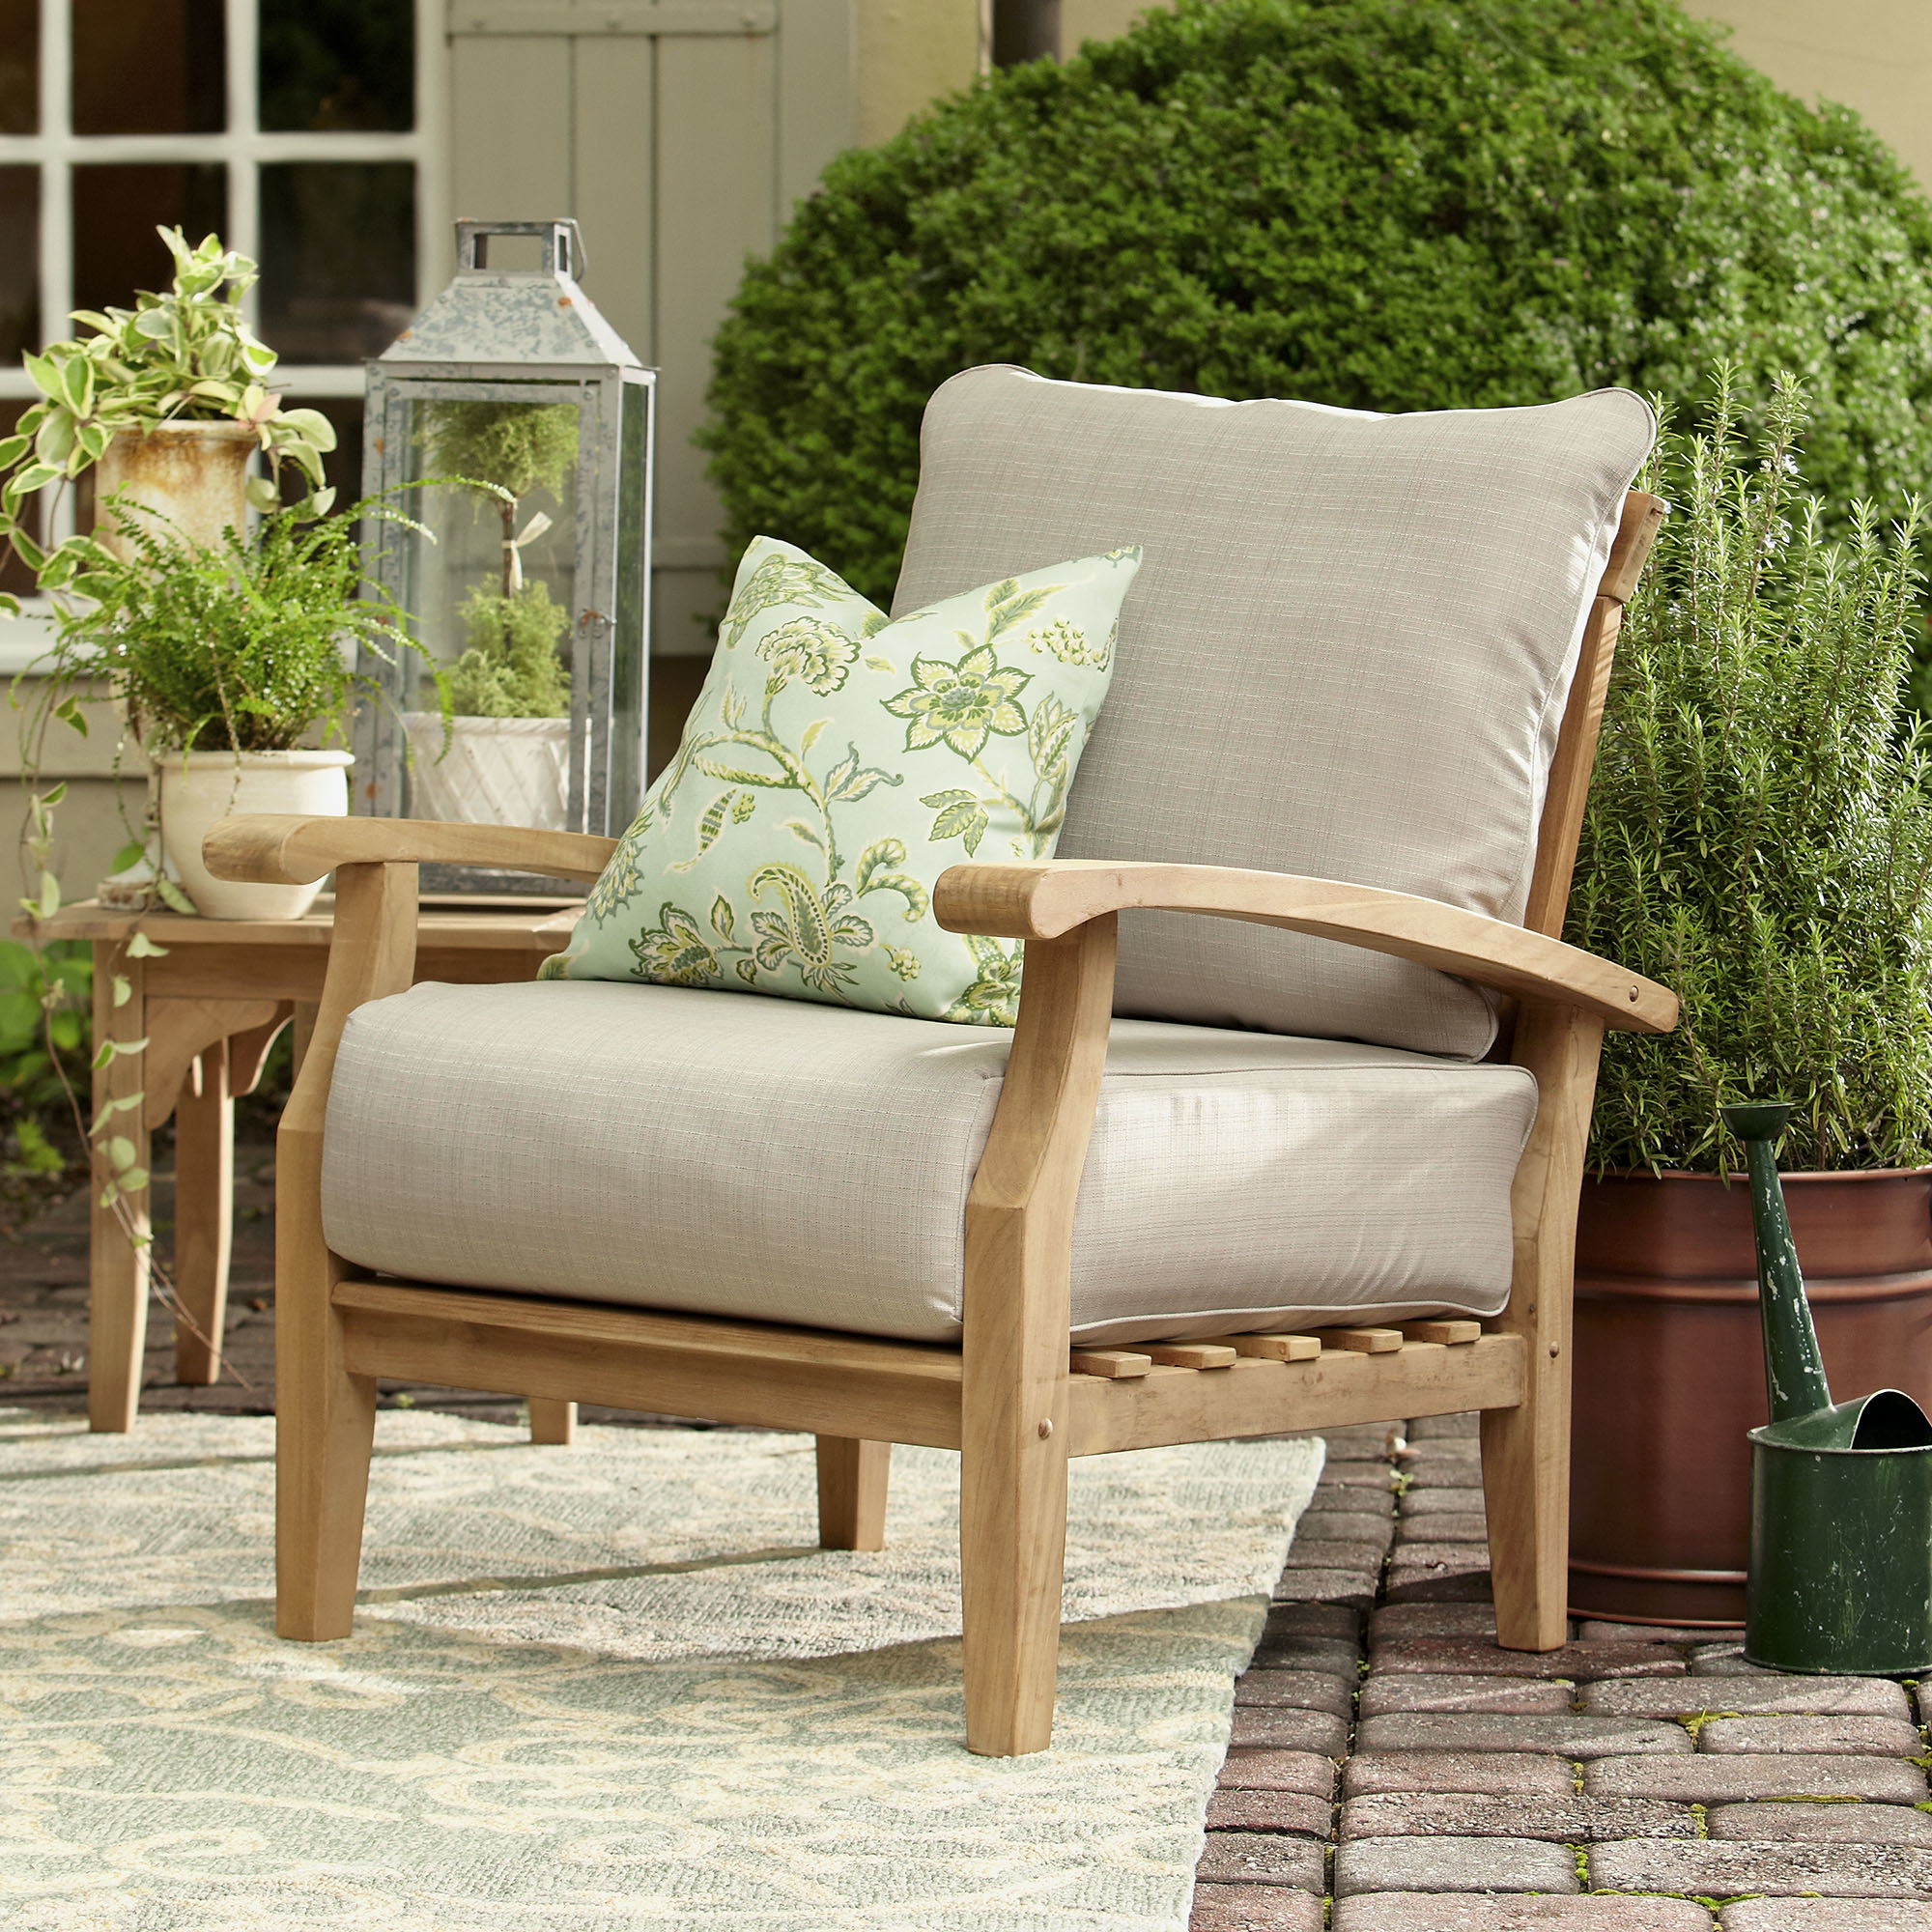 Elevate Your Outdoor Entertaining With Teak Furniture